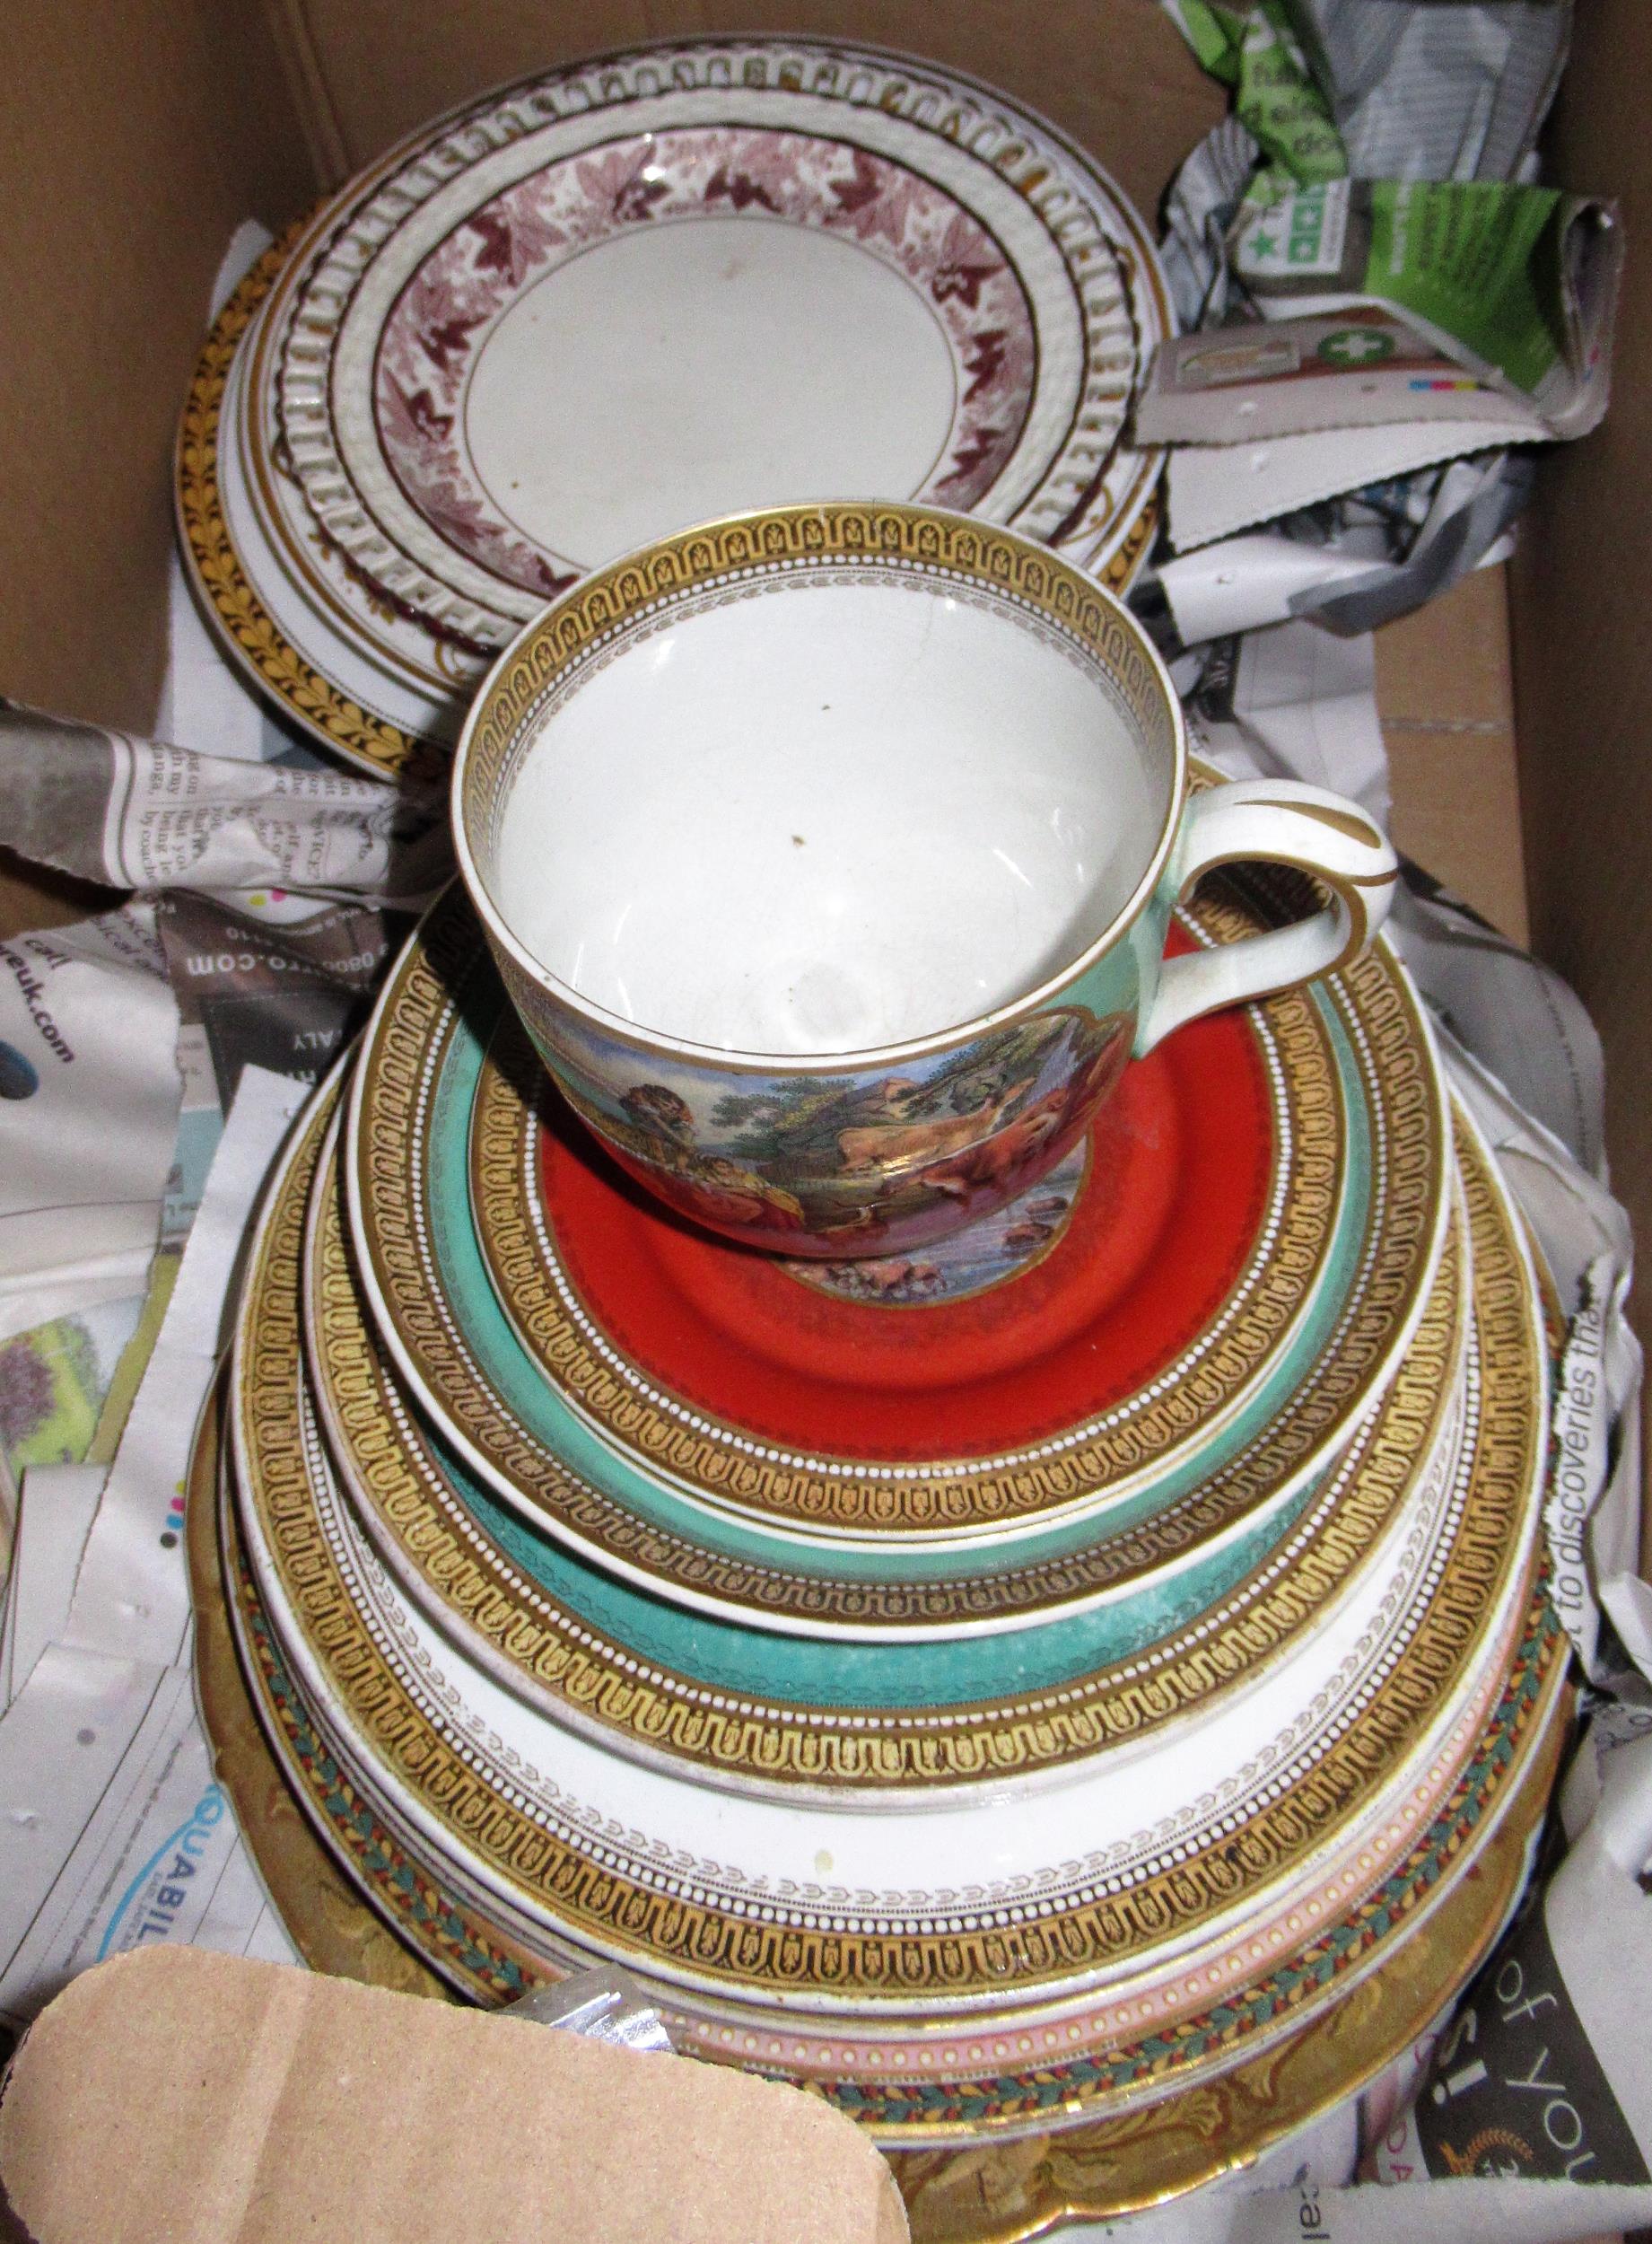 Collection of various 19th and early 20th Century Prattware plates, a mug and other ceramics